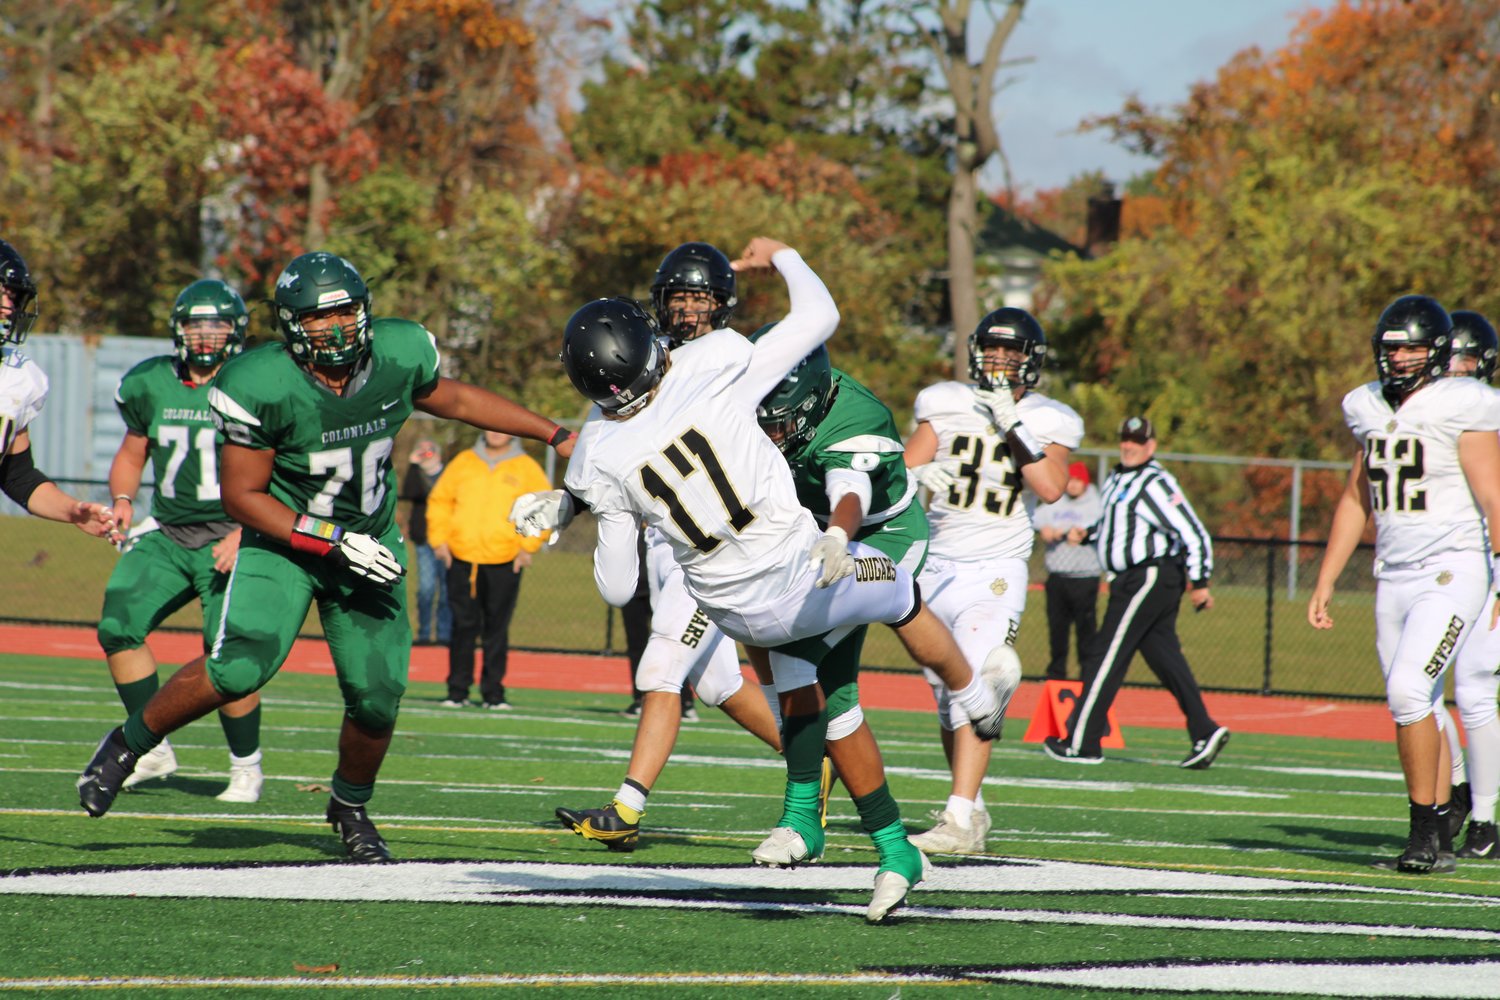 Sonny Mayo delivers a big hit on the Commack quarterback in a 31-16 semifinal victory.